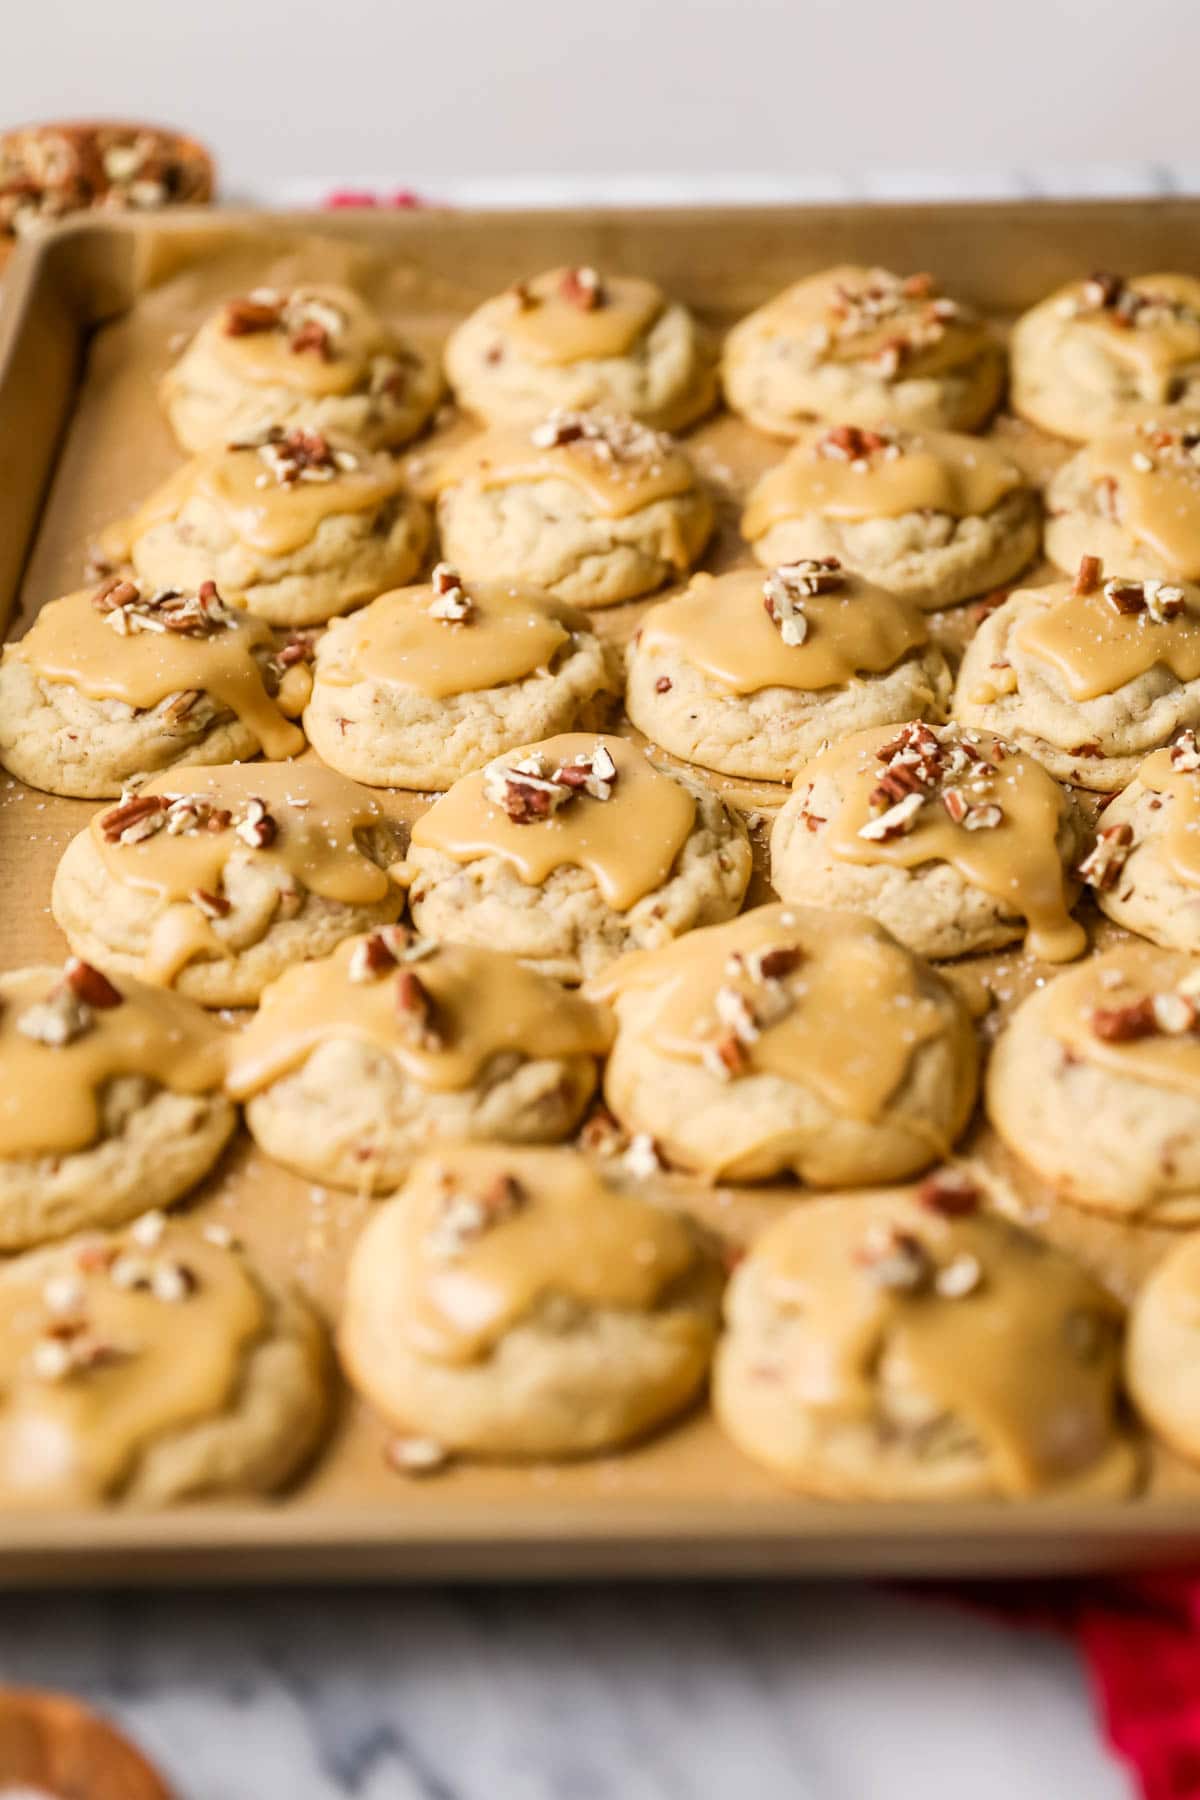 Rows of praline cookies topped with pecan pieces.